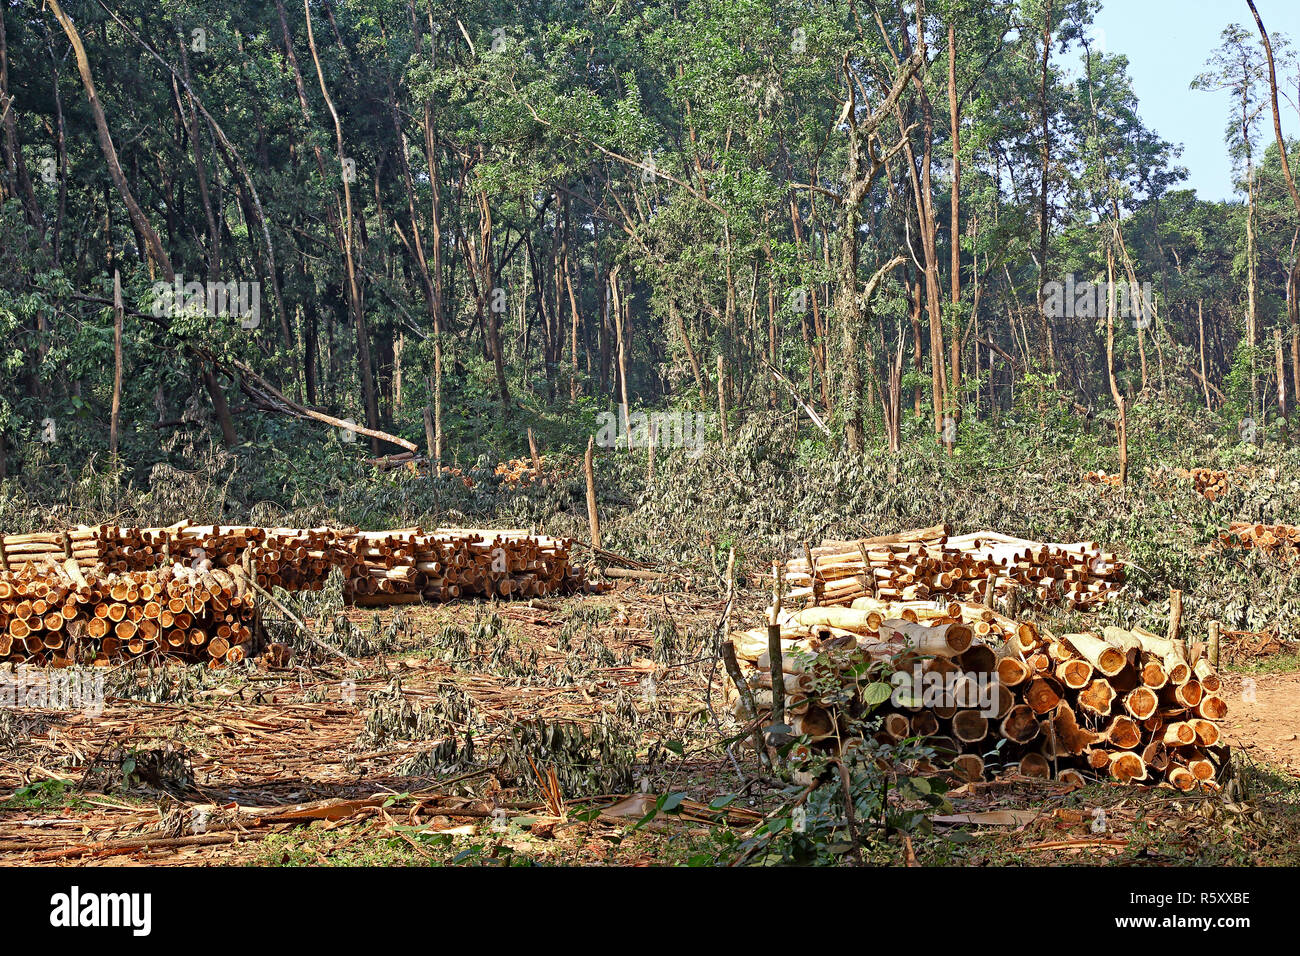 Stacks of peeled tree trunks received from clear cutting forest trees in Kerala, India Stock Photo